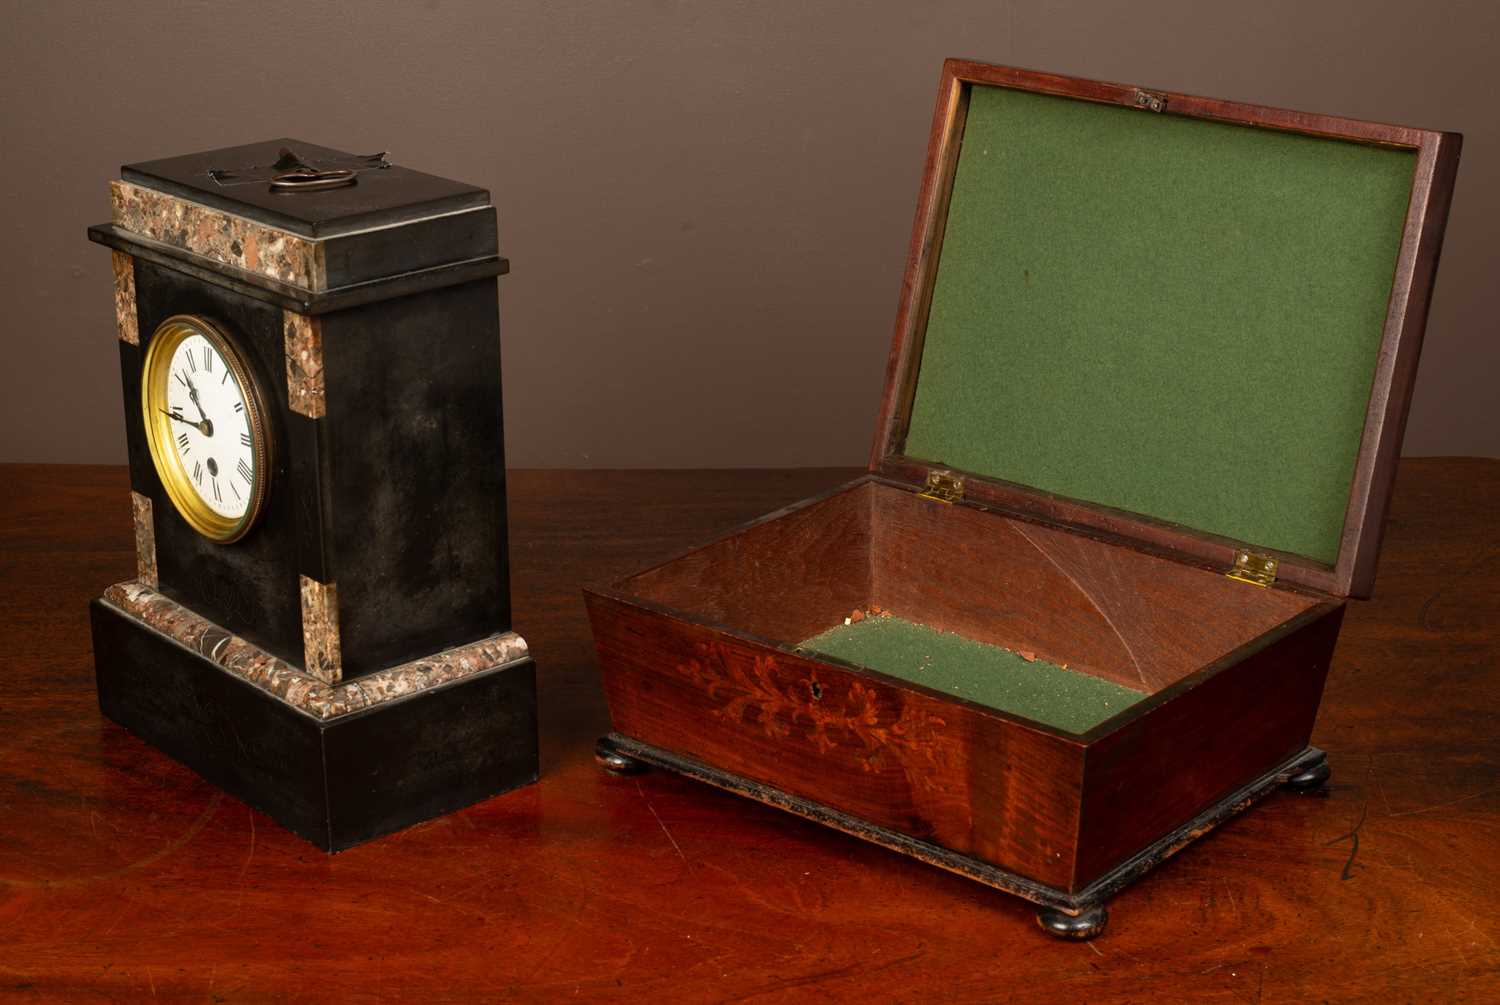 A slate mantel clock together with a rosewood tea caddy - Image 3 of 3